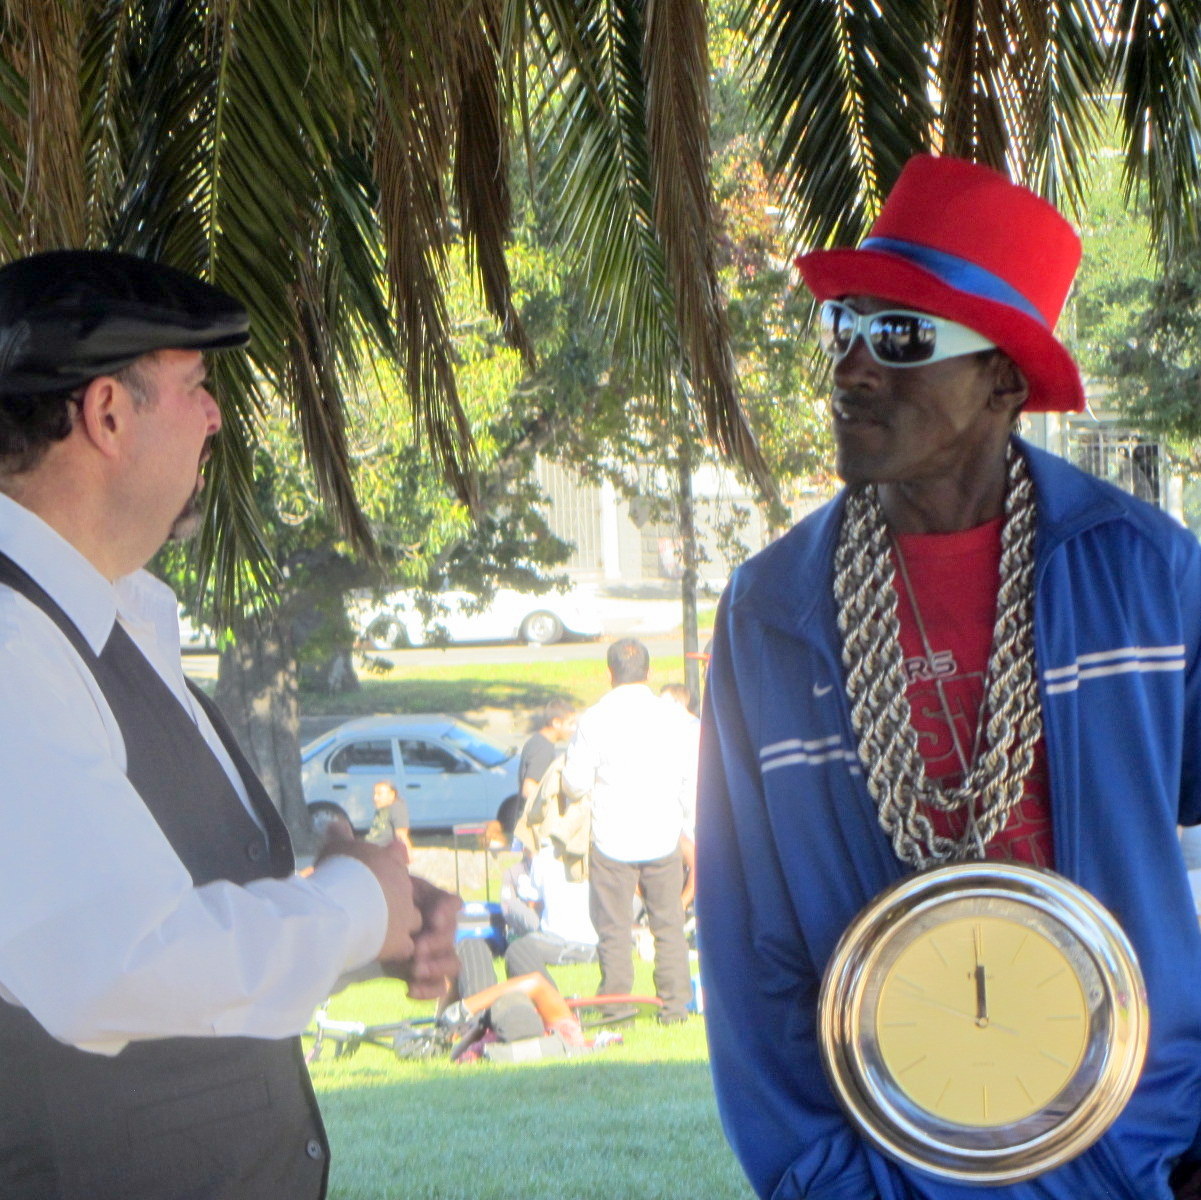 JAMES CROCI WITNESSES TO CLOCK MAN AT DOLORES PARK